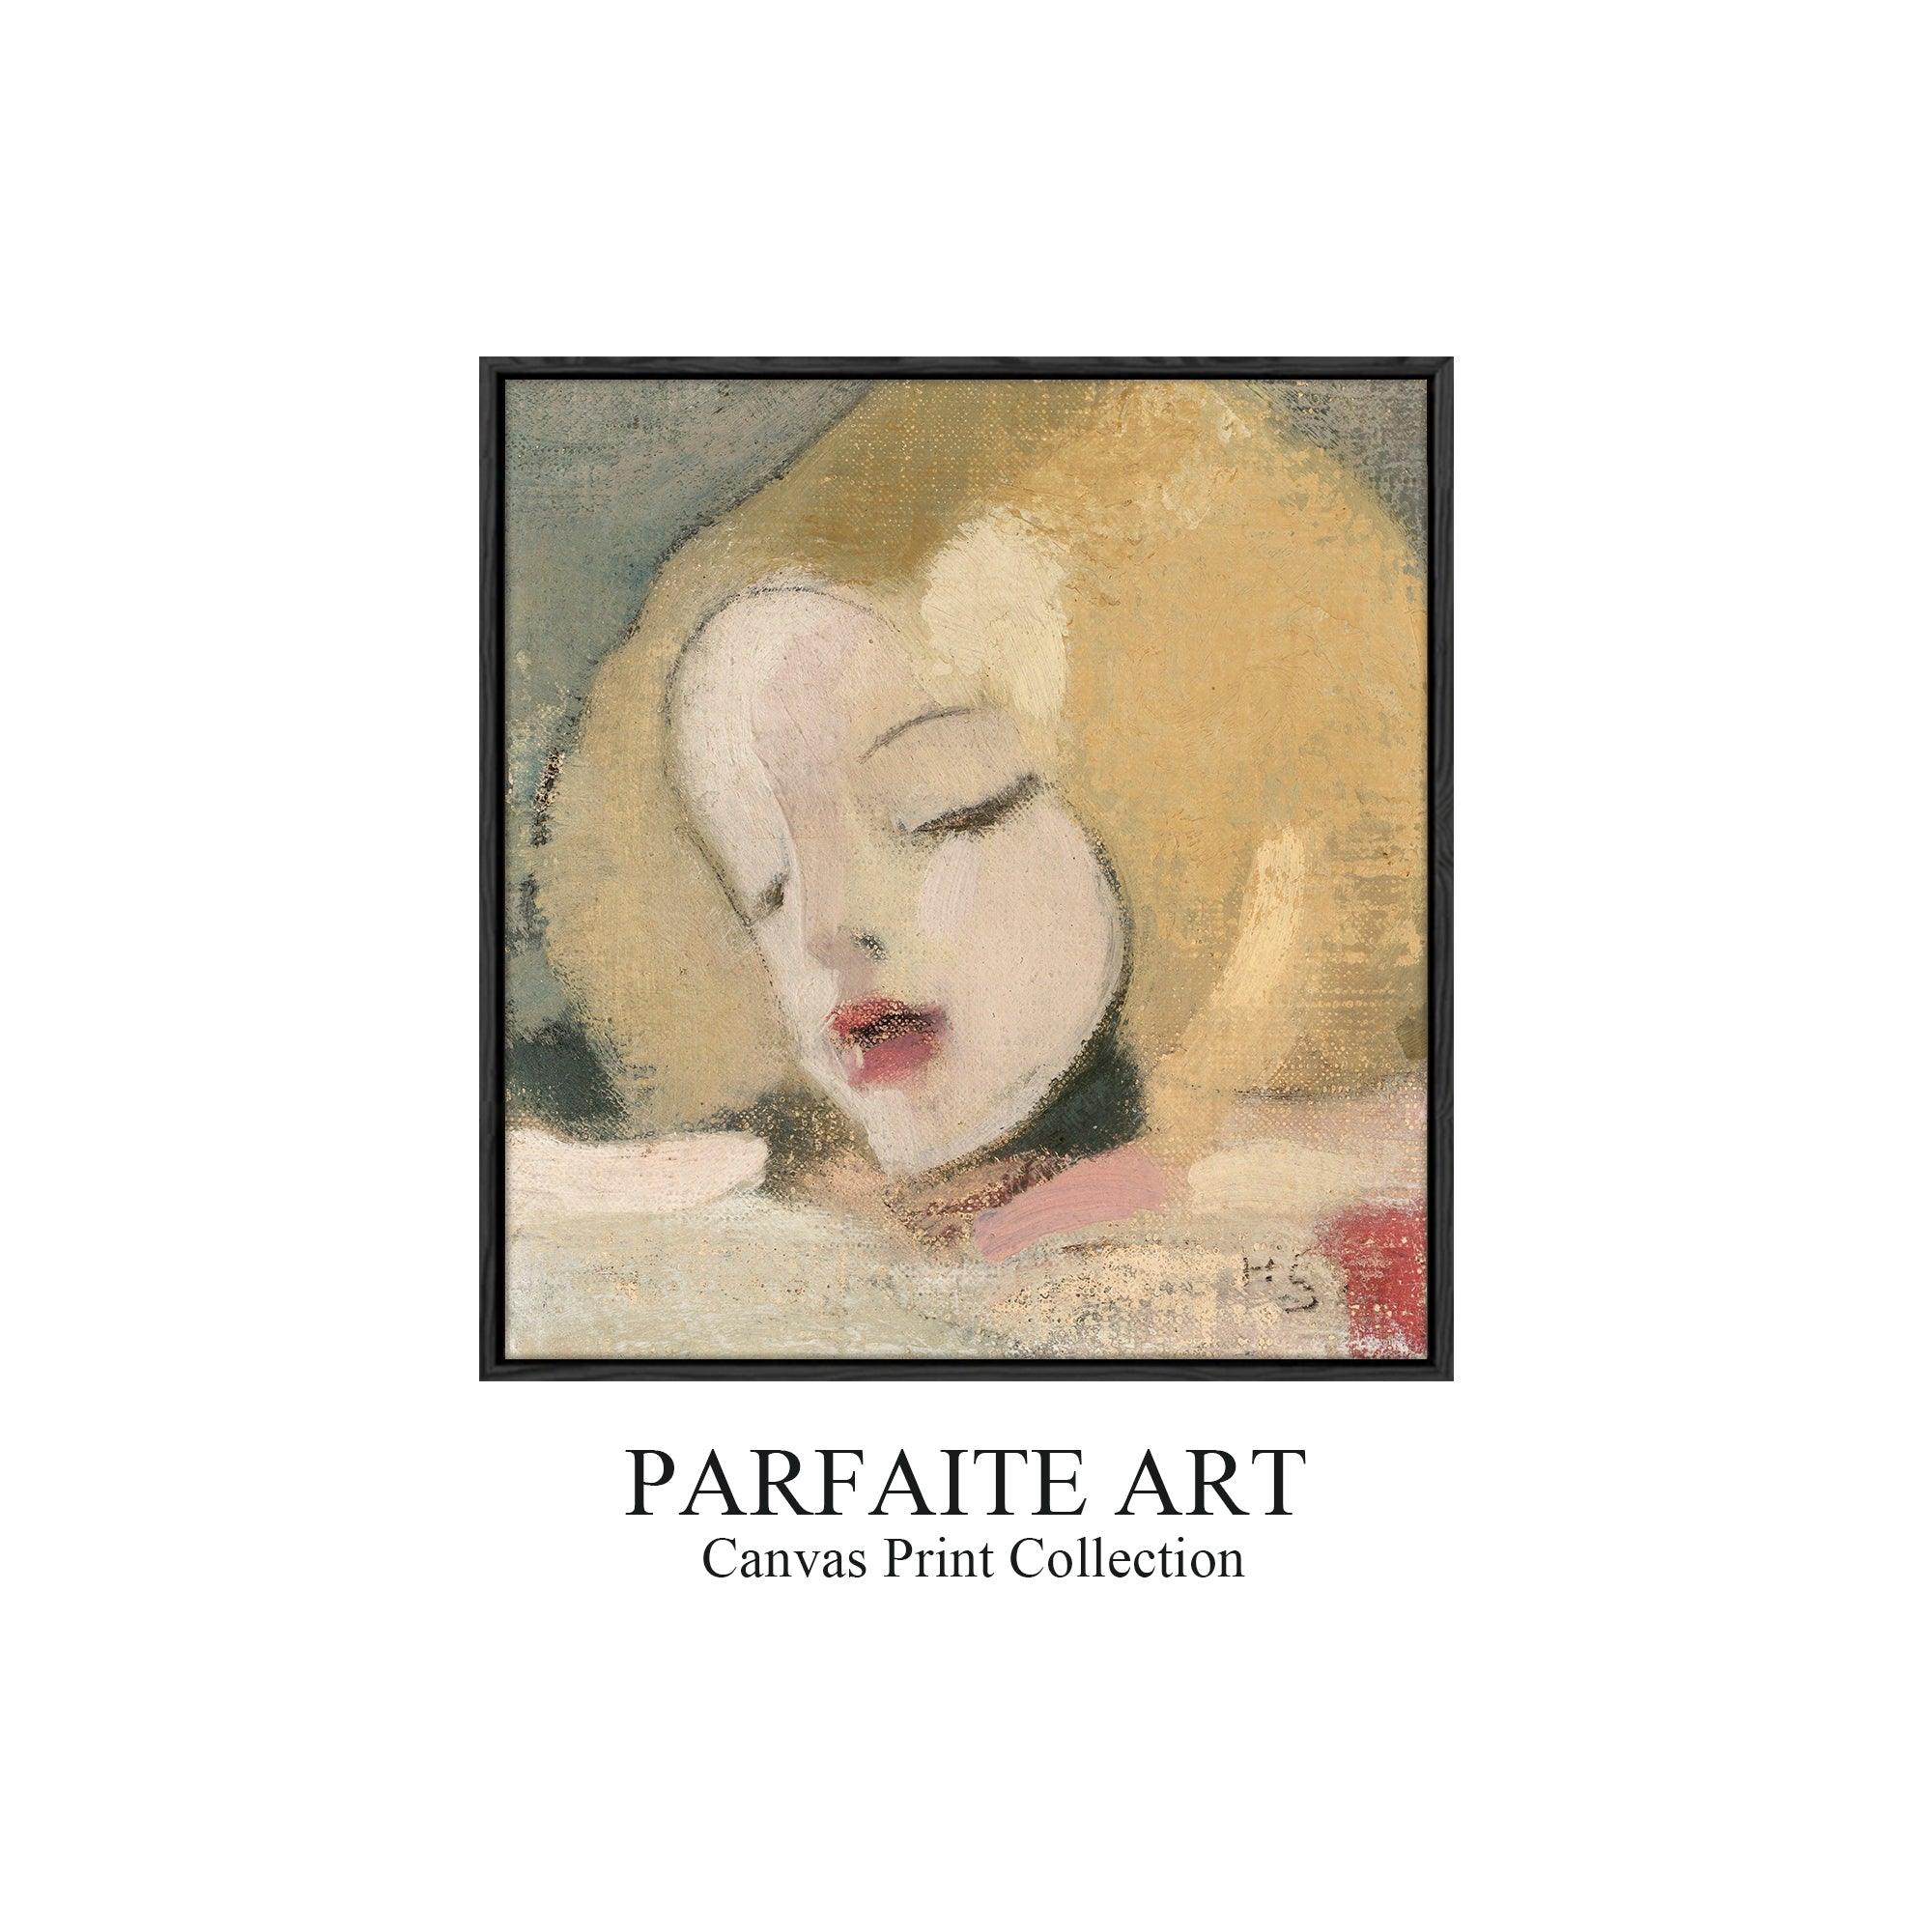 Classic Vintage Wall Art Prints: Giclée Quality, World-Renowned Paintings & Art Deco Prints, Expressionism Oil Painting - Available on Printable Canvas #88